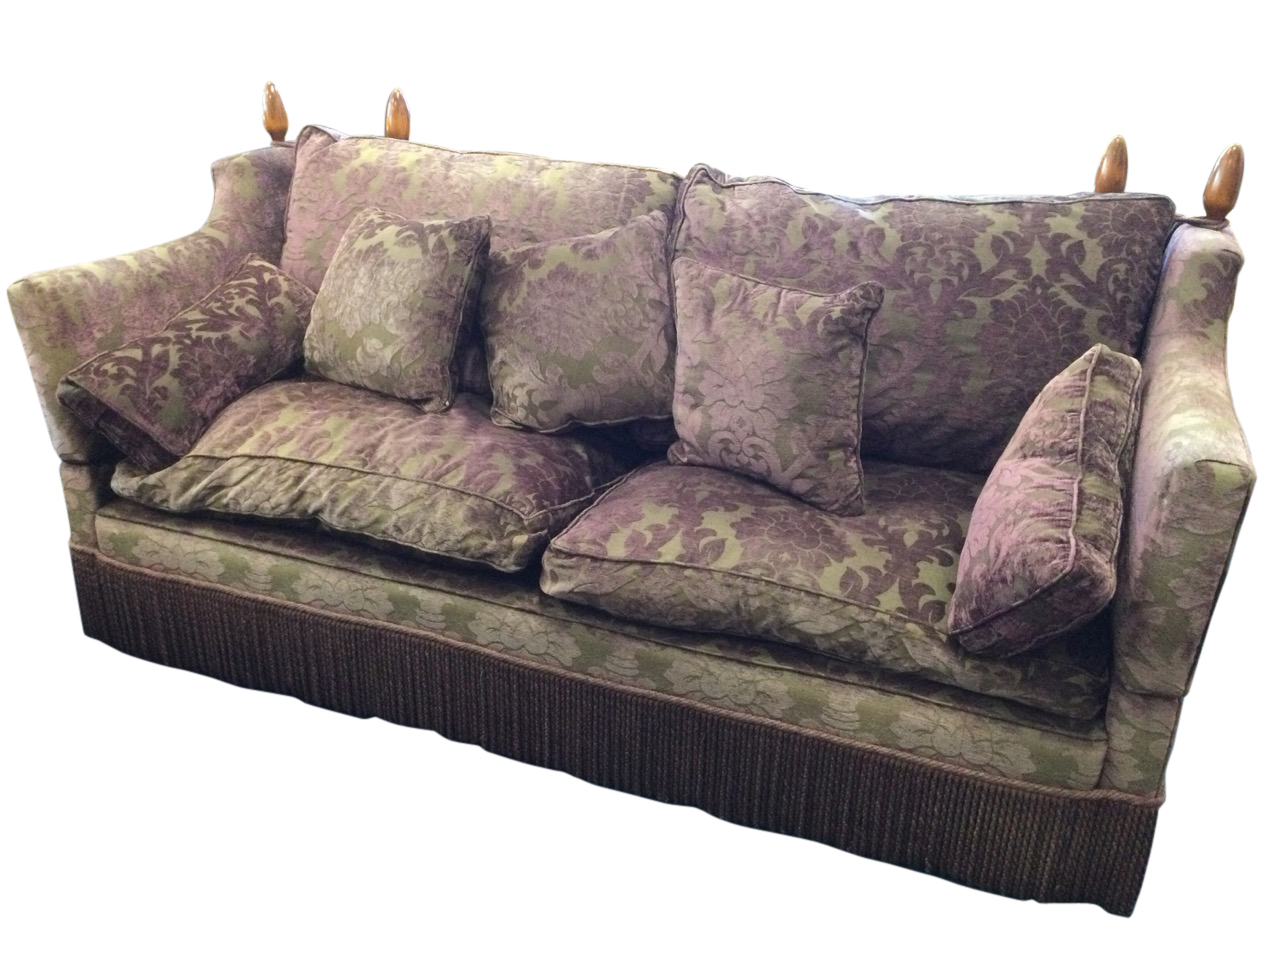 A Knole house two/three-seater sofa with shaped drop arms and loose cushions, upholstered in